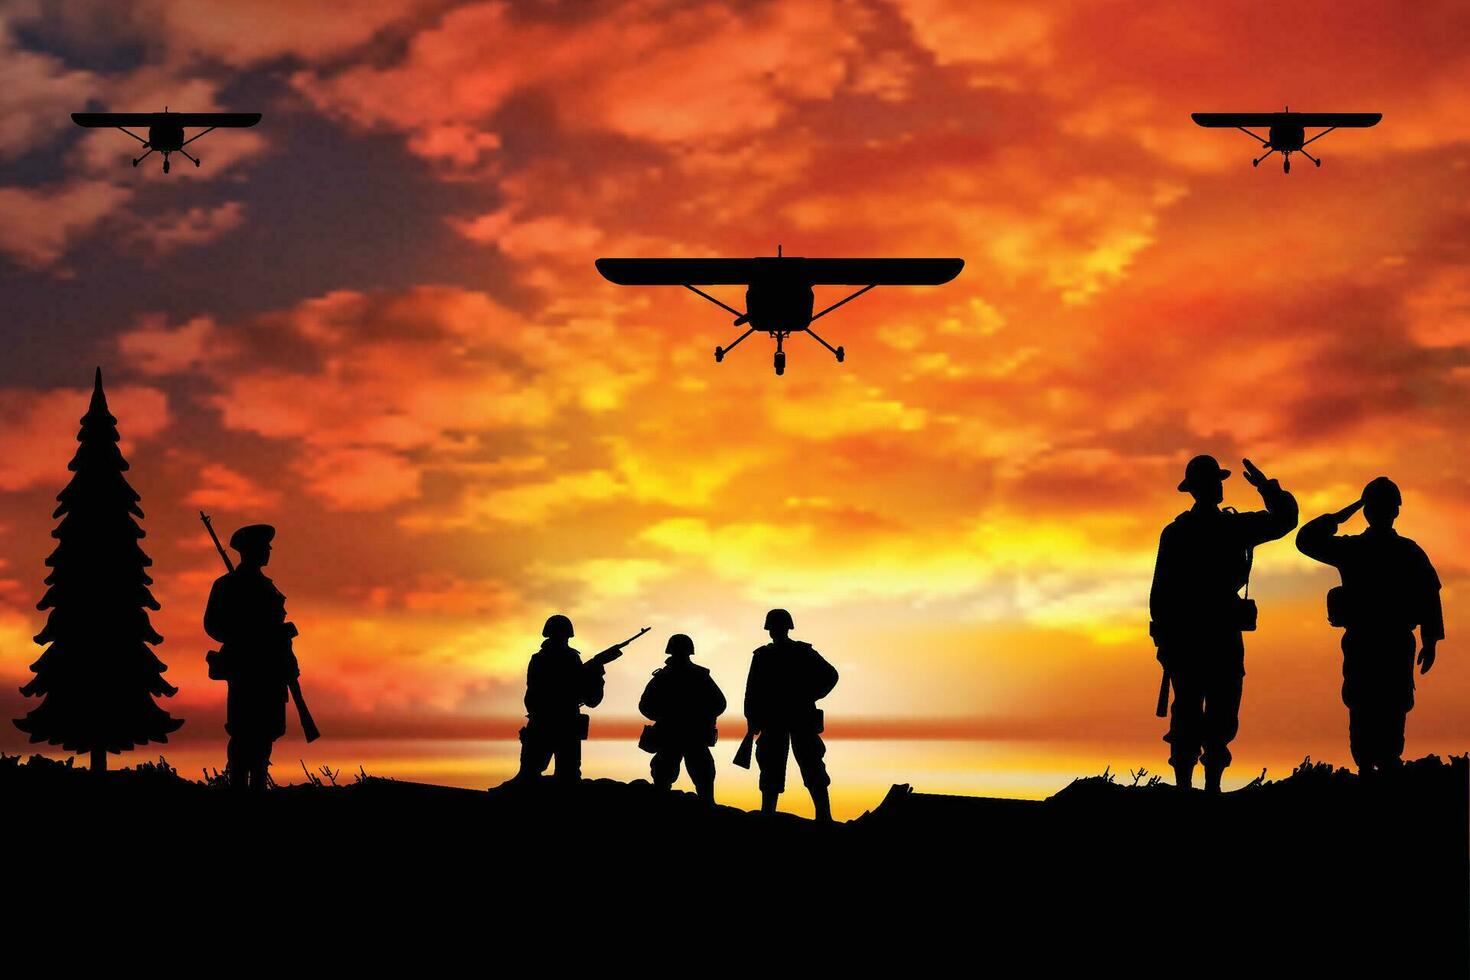 Silhouetted People and Airplanes Against an Orange and Yellow Sunset Sky with Clouds vector